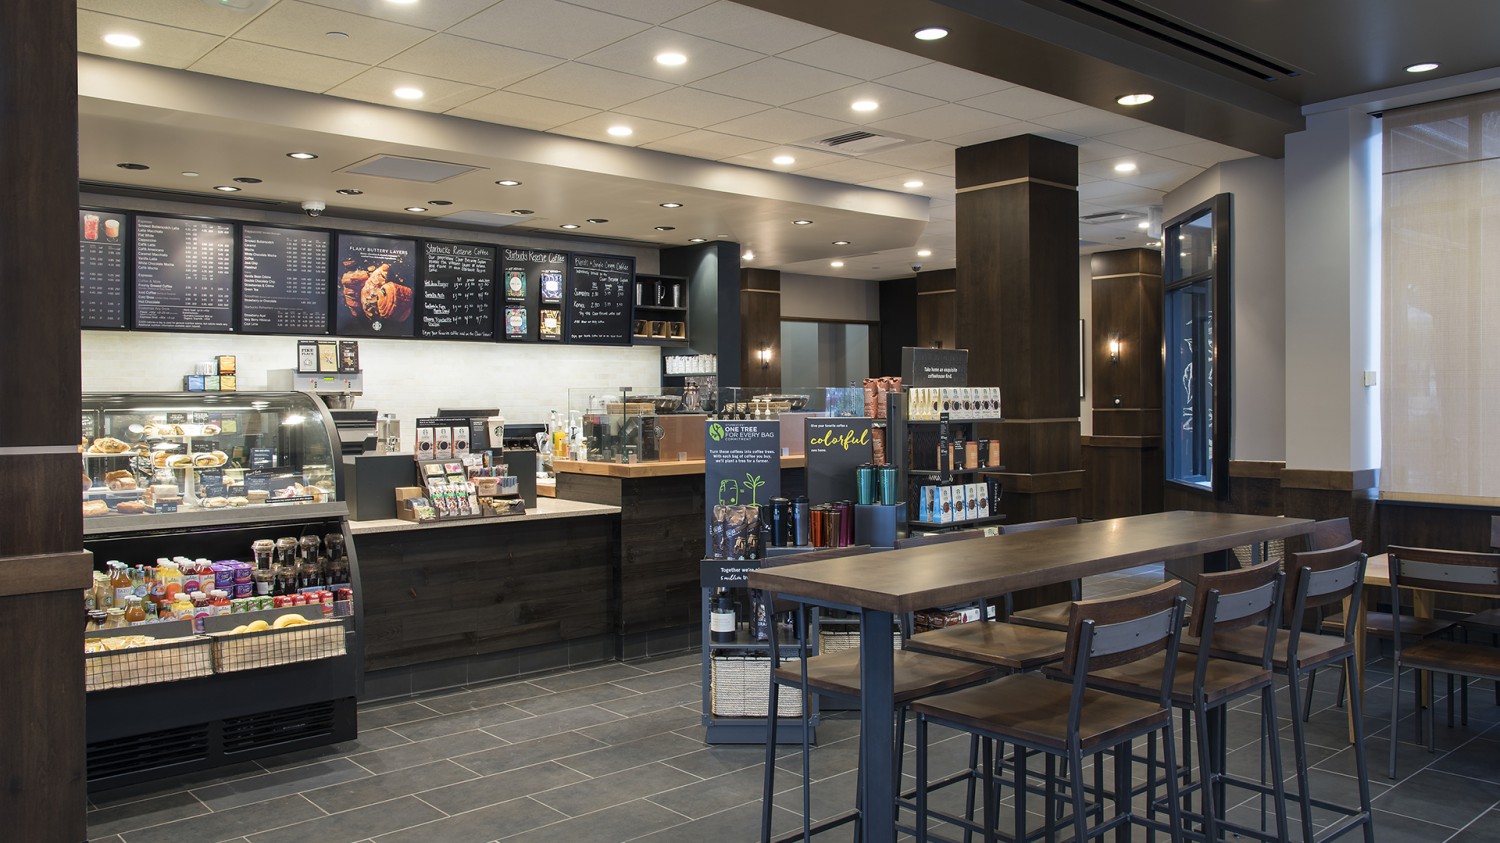 Amway Grand_Starbucks_Counter_Cash Register_Coffee Machines_Food Display_Retail Shelves_Table_Chairs_Menu Boards